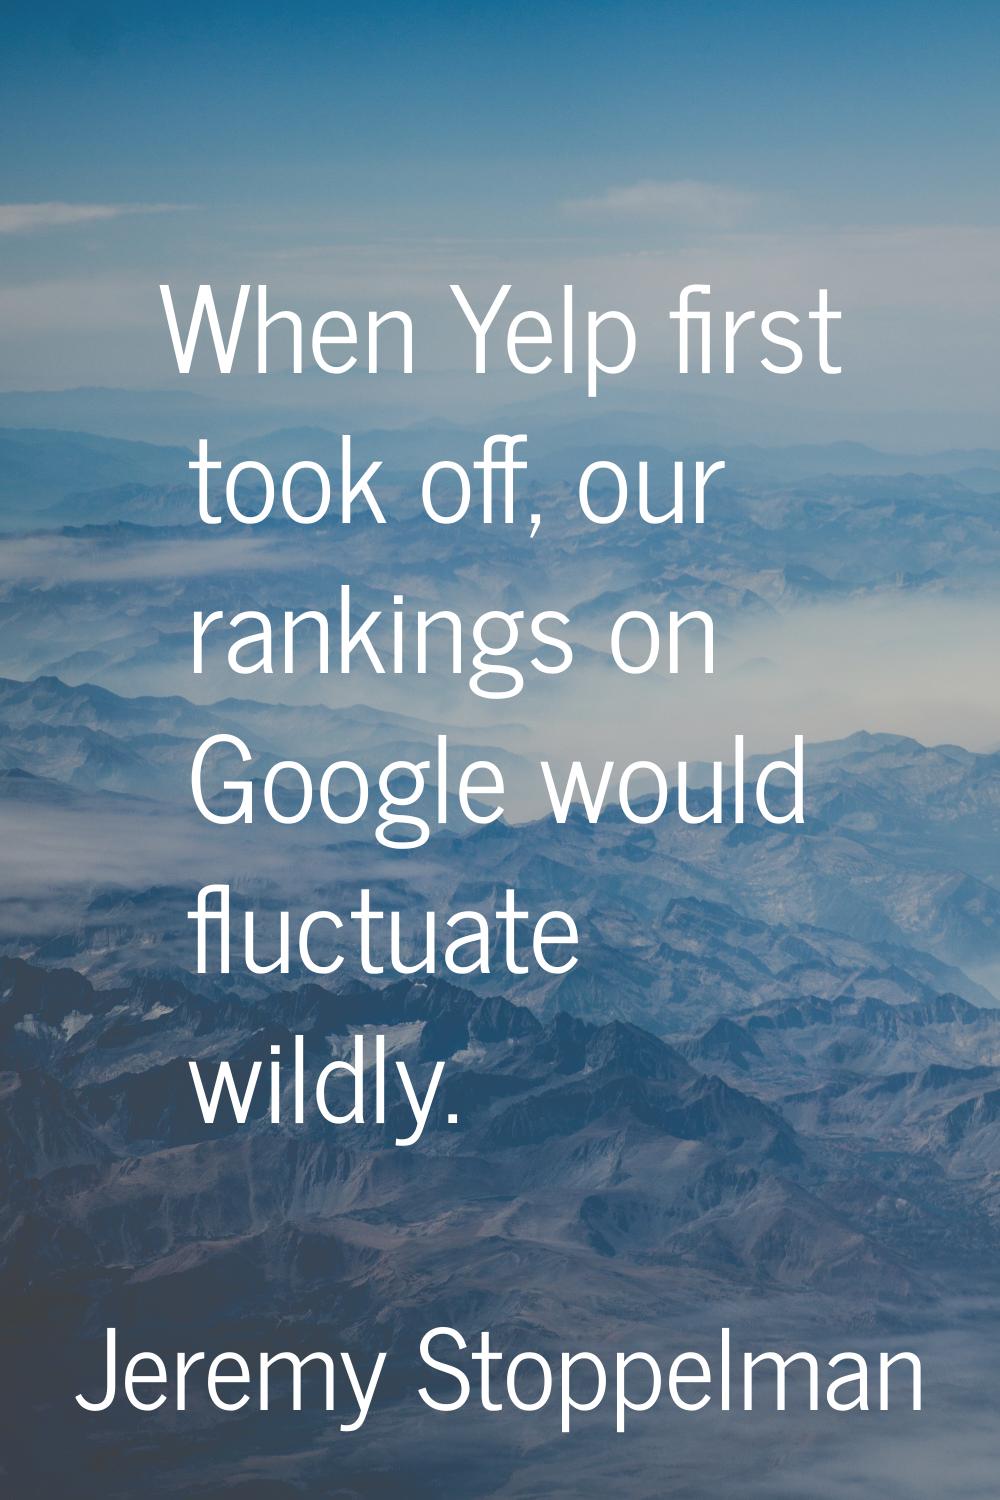 When Yelp first took off, our rankings on Google would fluctuate wildly.